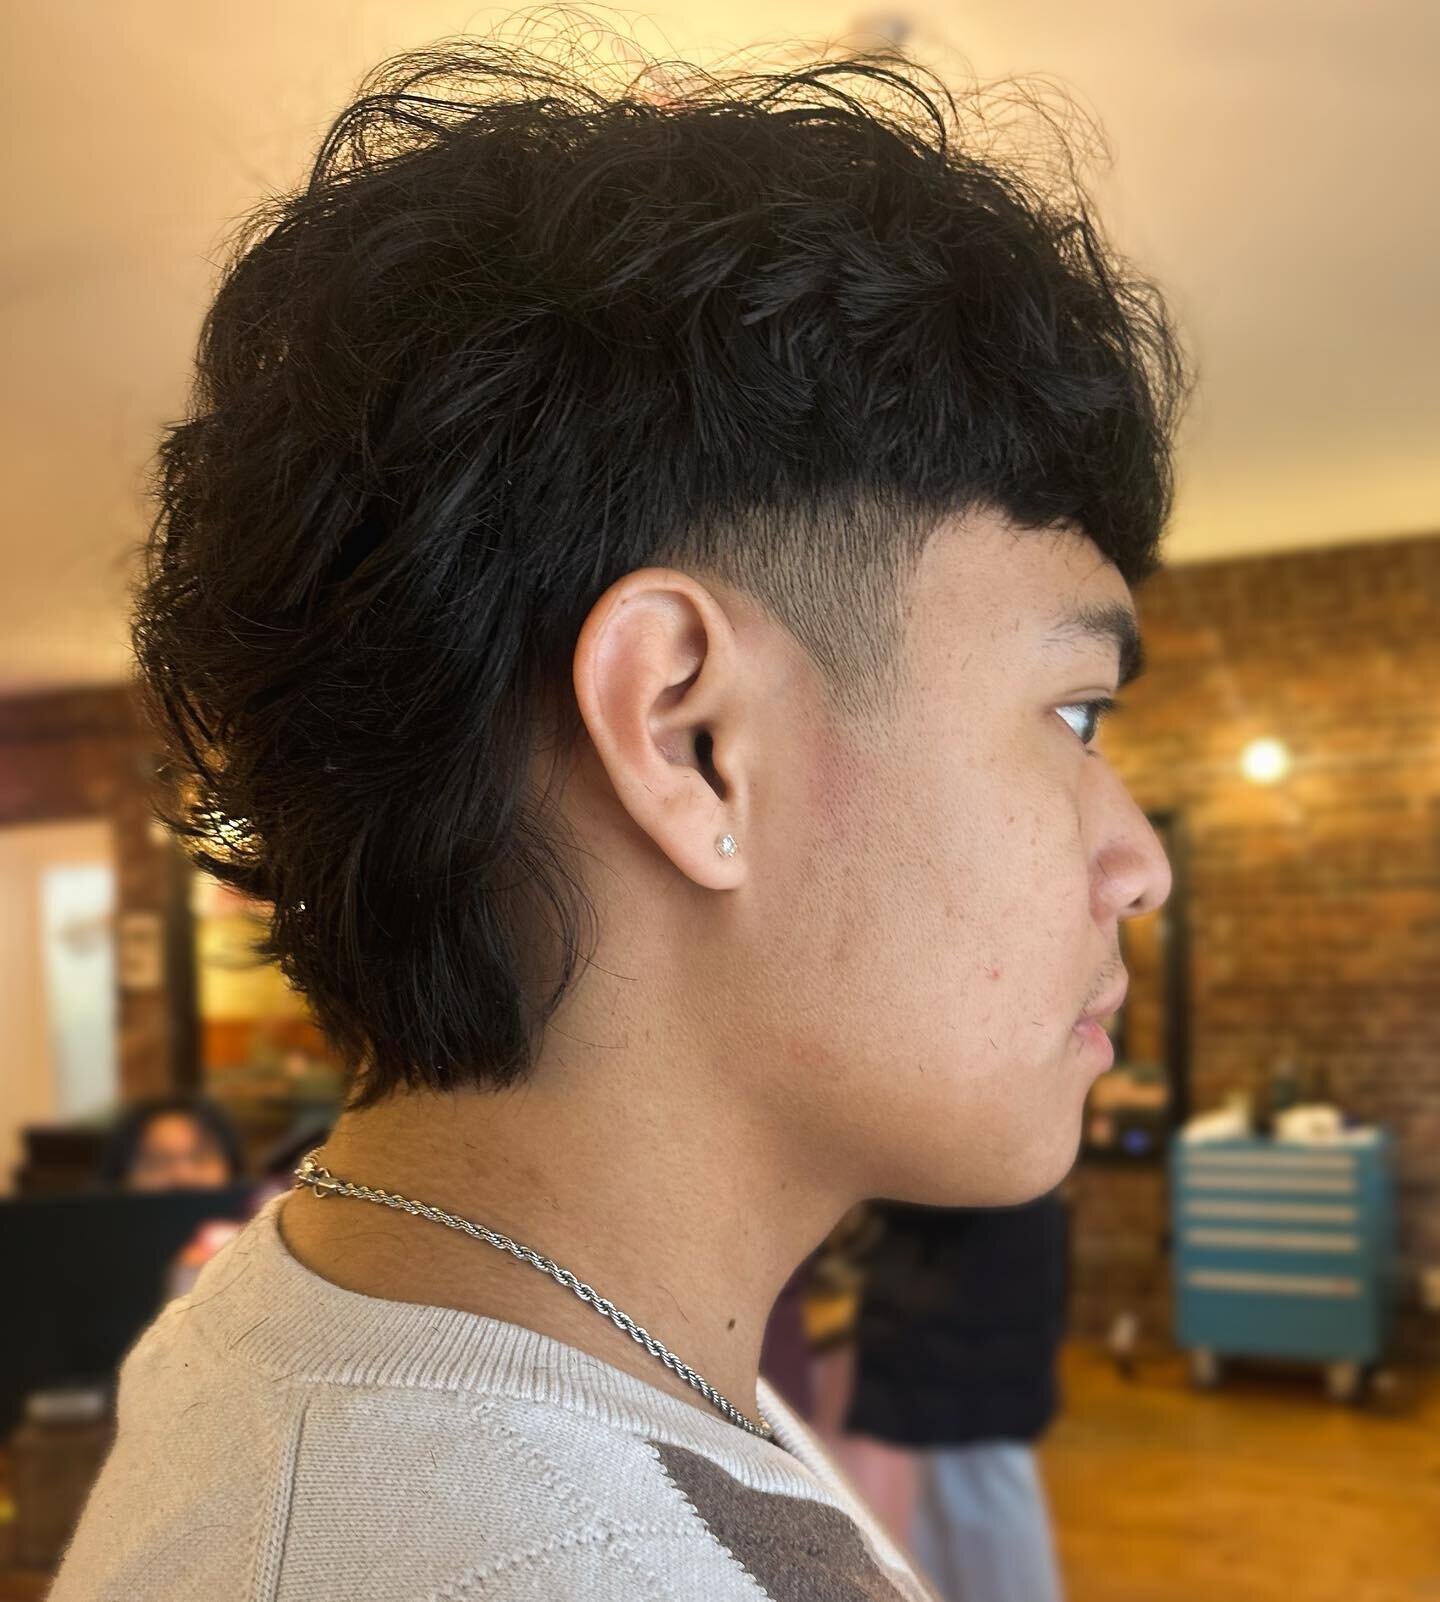 More mullets like this pleassse. 
Hope everyone is staying as warm as possible out there! ❄️

#chachaslex #chachasalon #lex #lexky #lexingtonky #ky #kyhairstylist #kyhair #lexingtonhairstylist #lexingtonhair #universityofkentucky